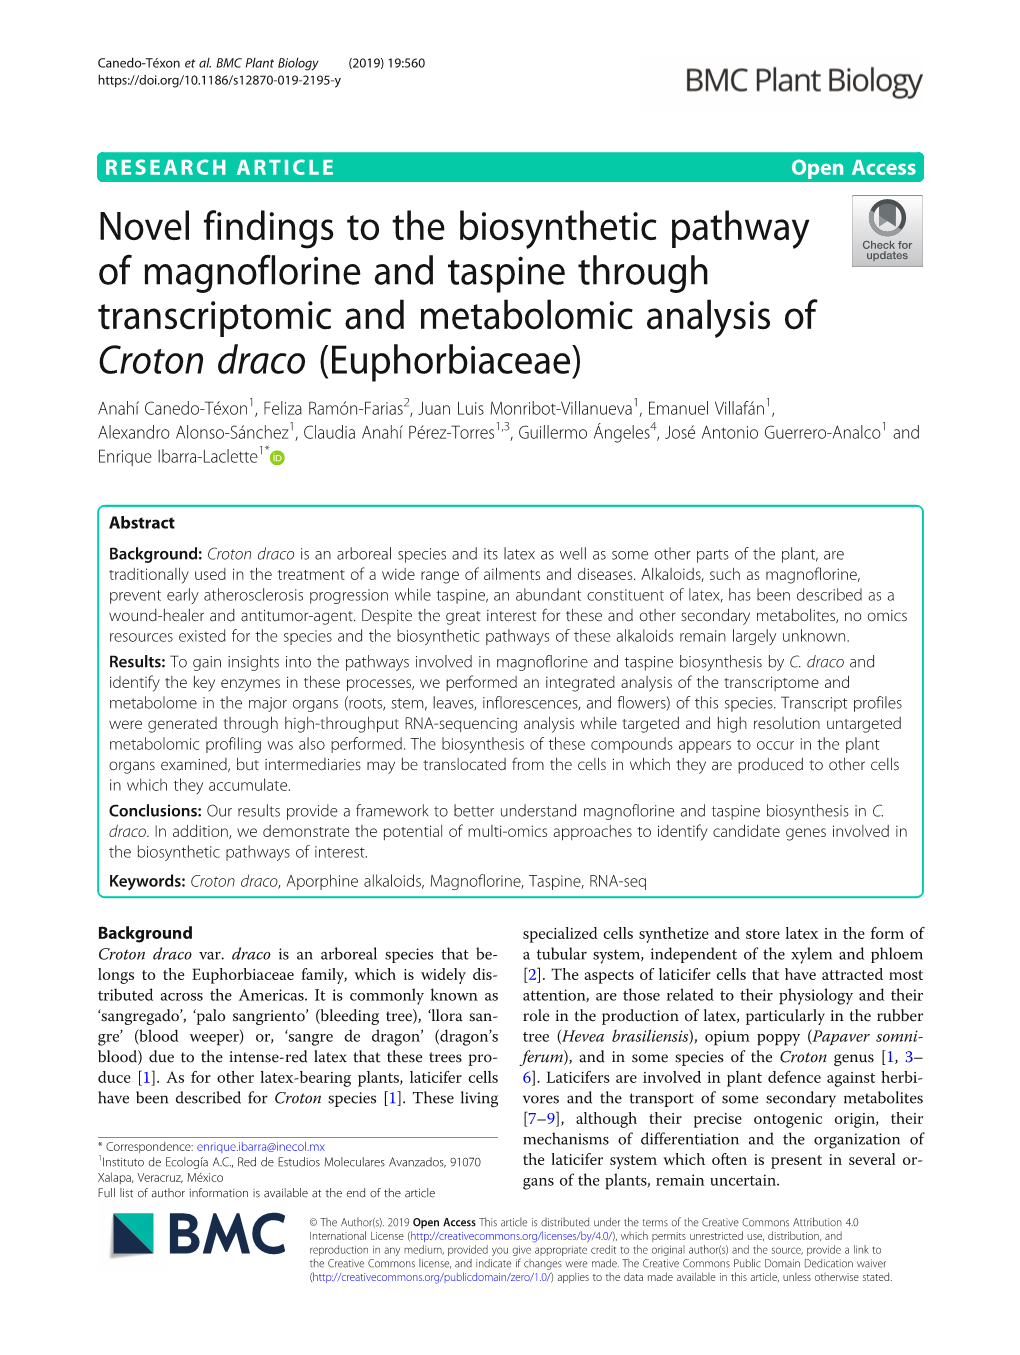 Novel Findings to the Biosynthetic Pathway of Magnoflorine And